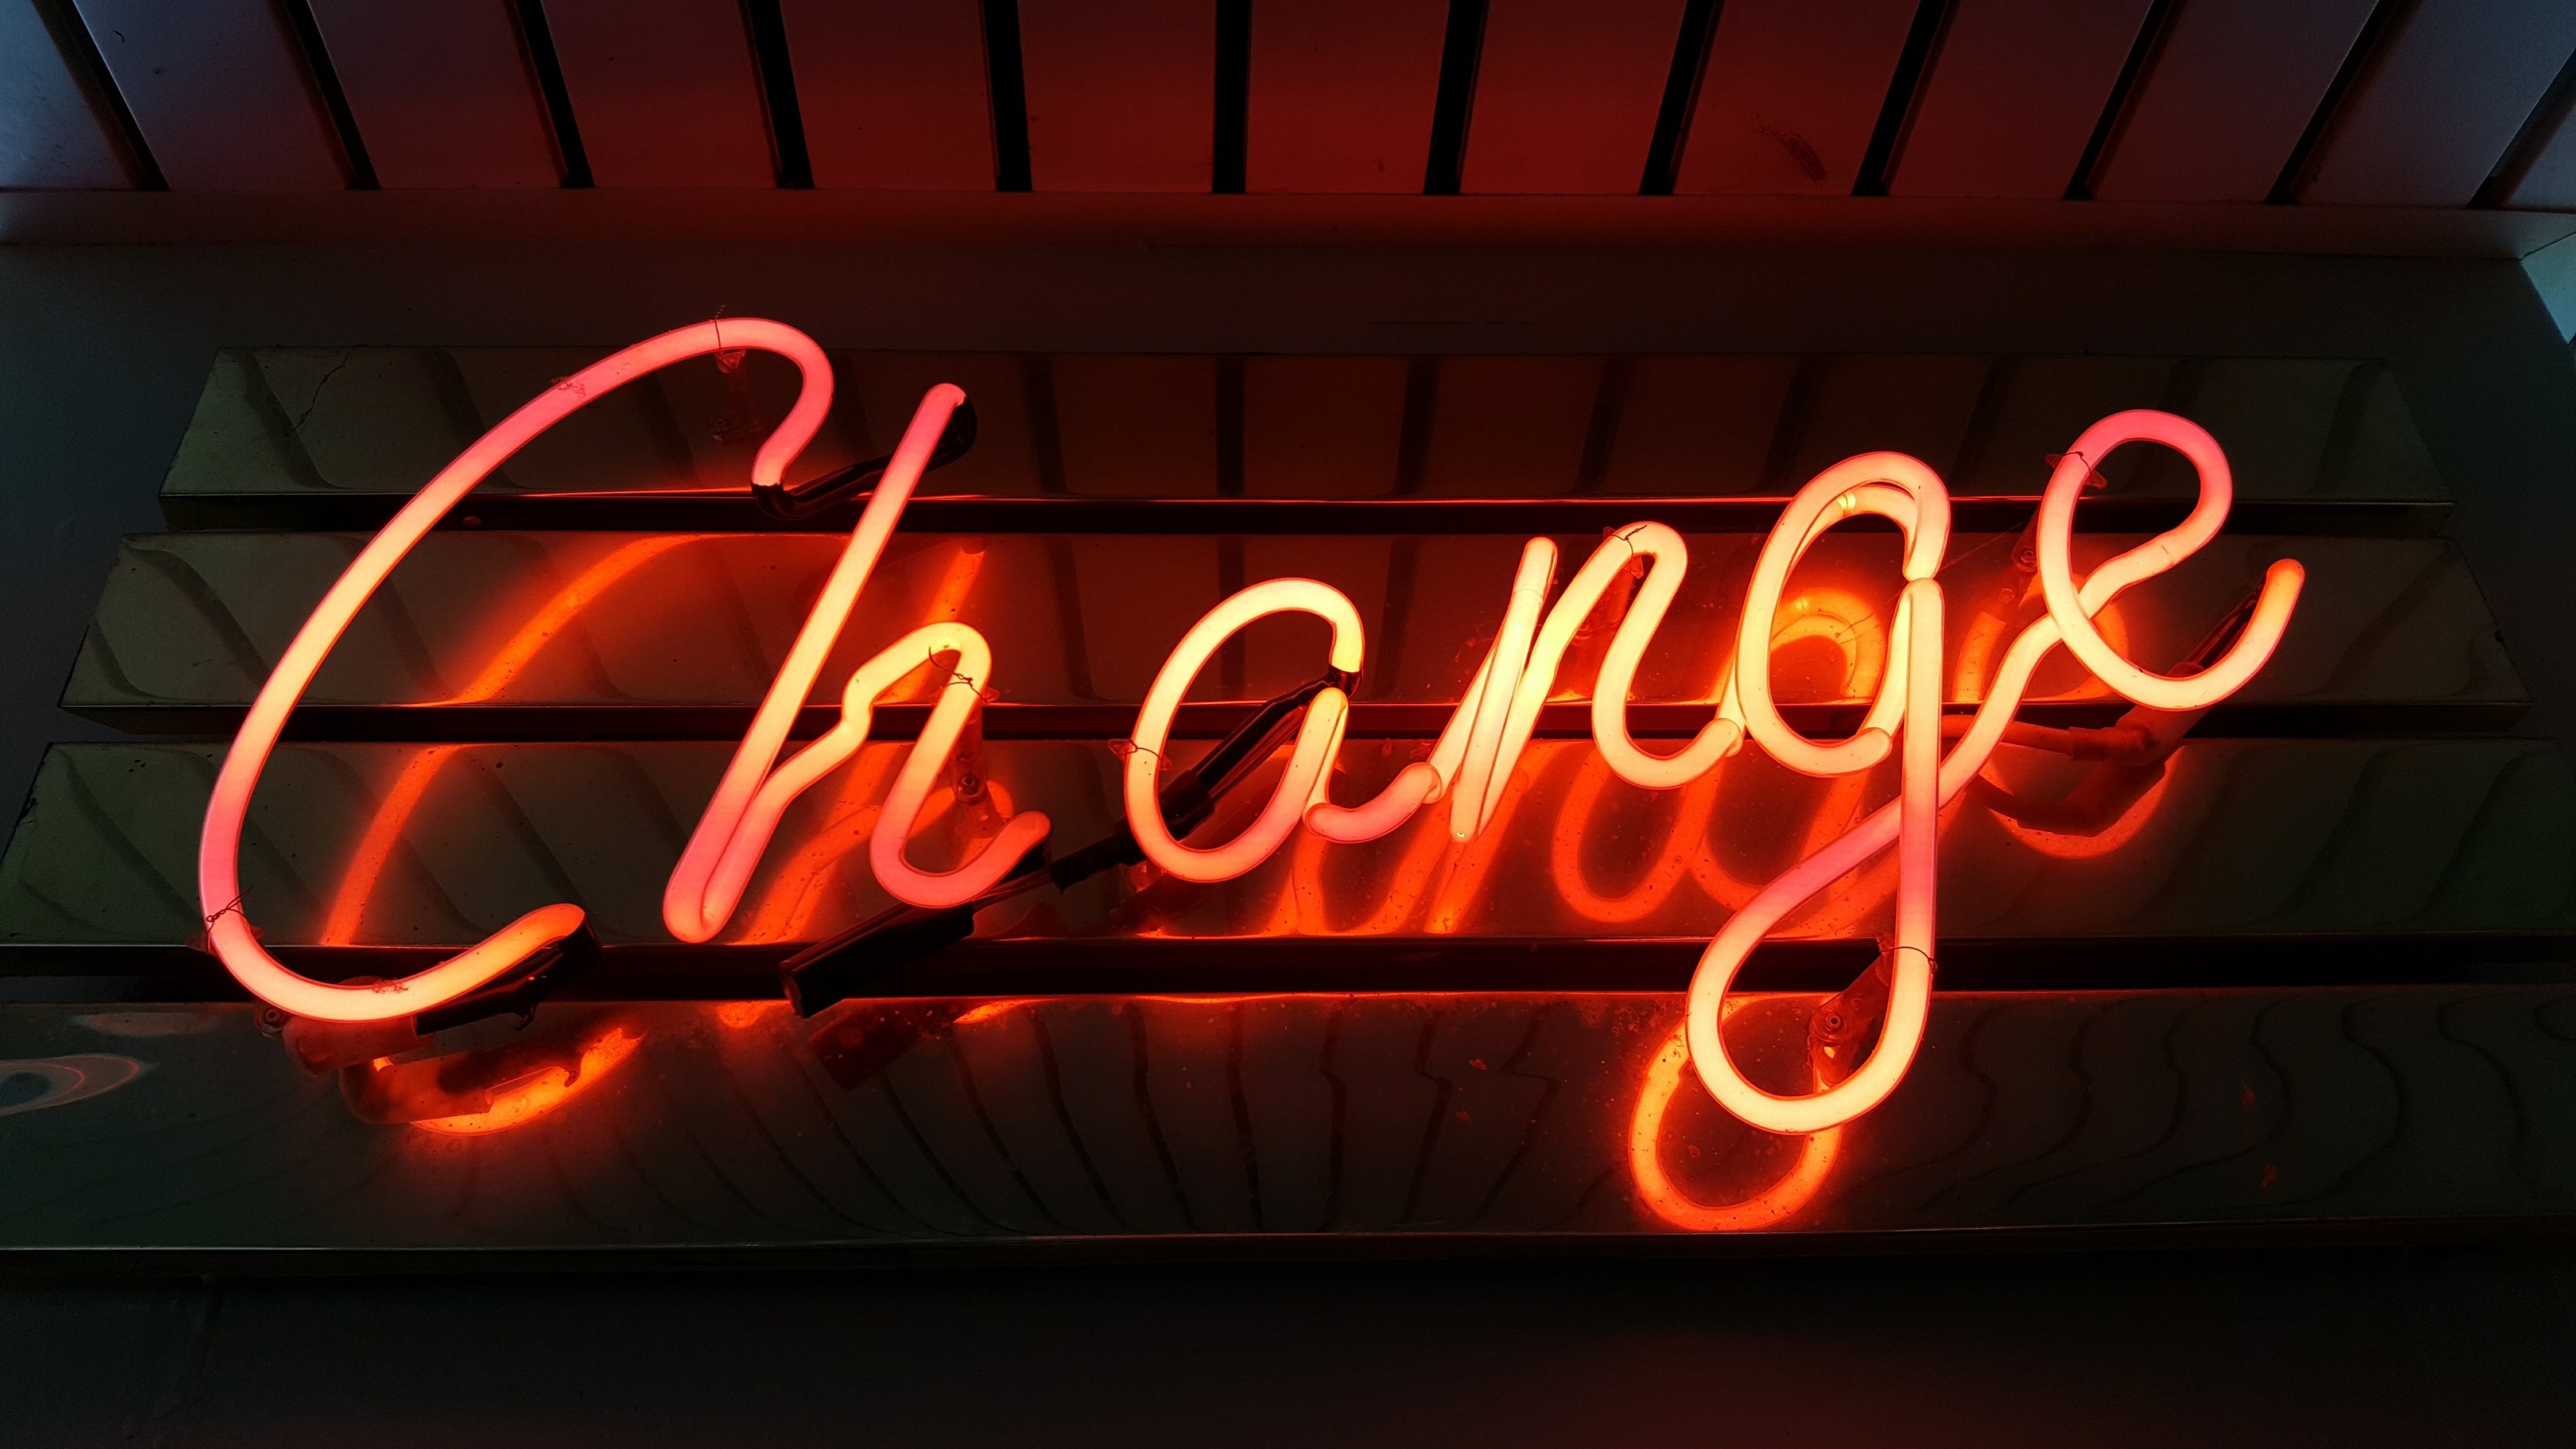 Neon sign that says "Change"